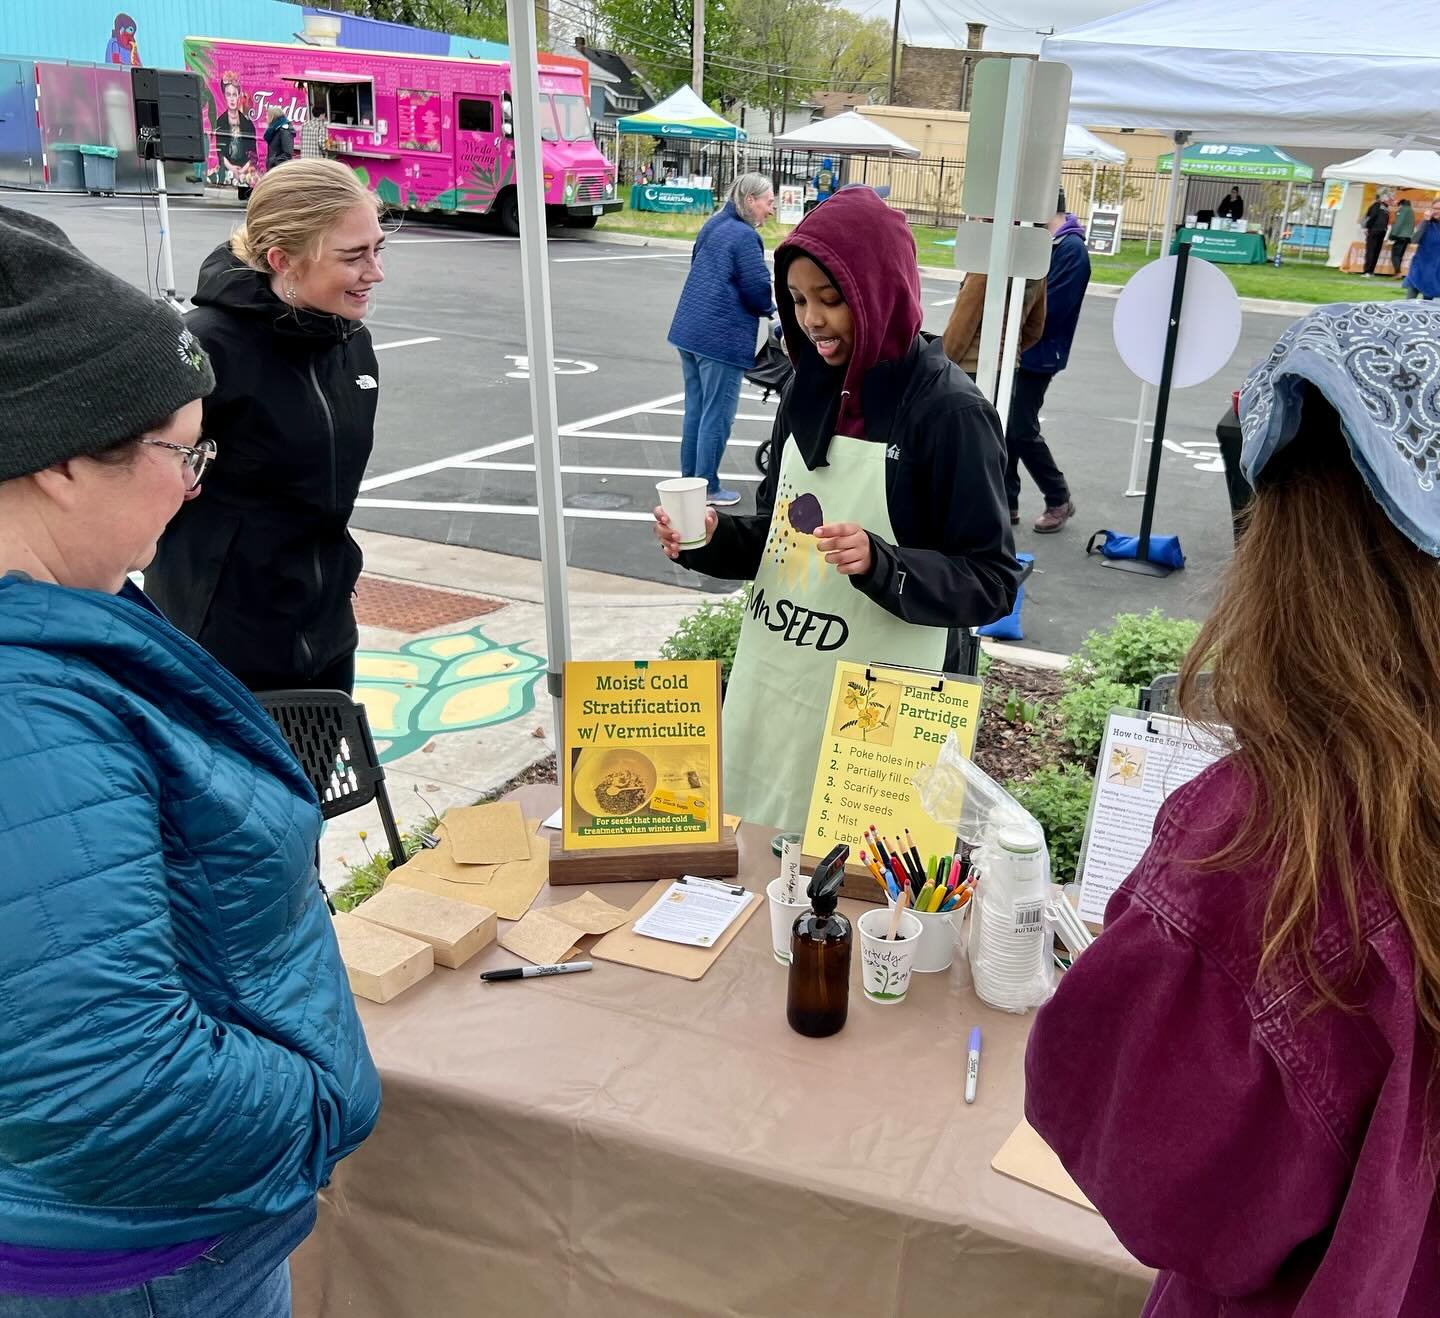 While the weather was a bit mixed on Saturday, @springboardarts #springpop had a lot happening! @mn_seed_project sent home #nativepollinatorplant seeds and future partridge pea plants. We loved all the artists, performers and food. 

📷= @meathalflif